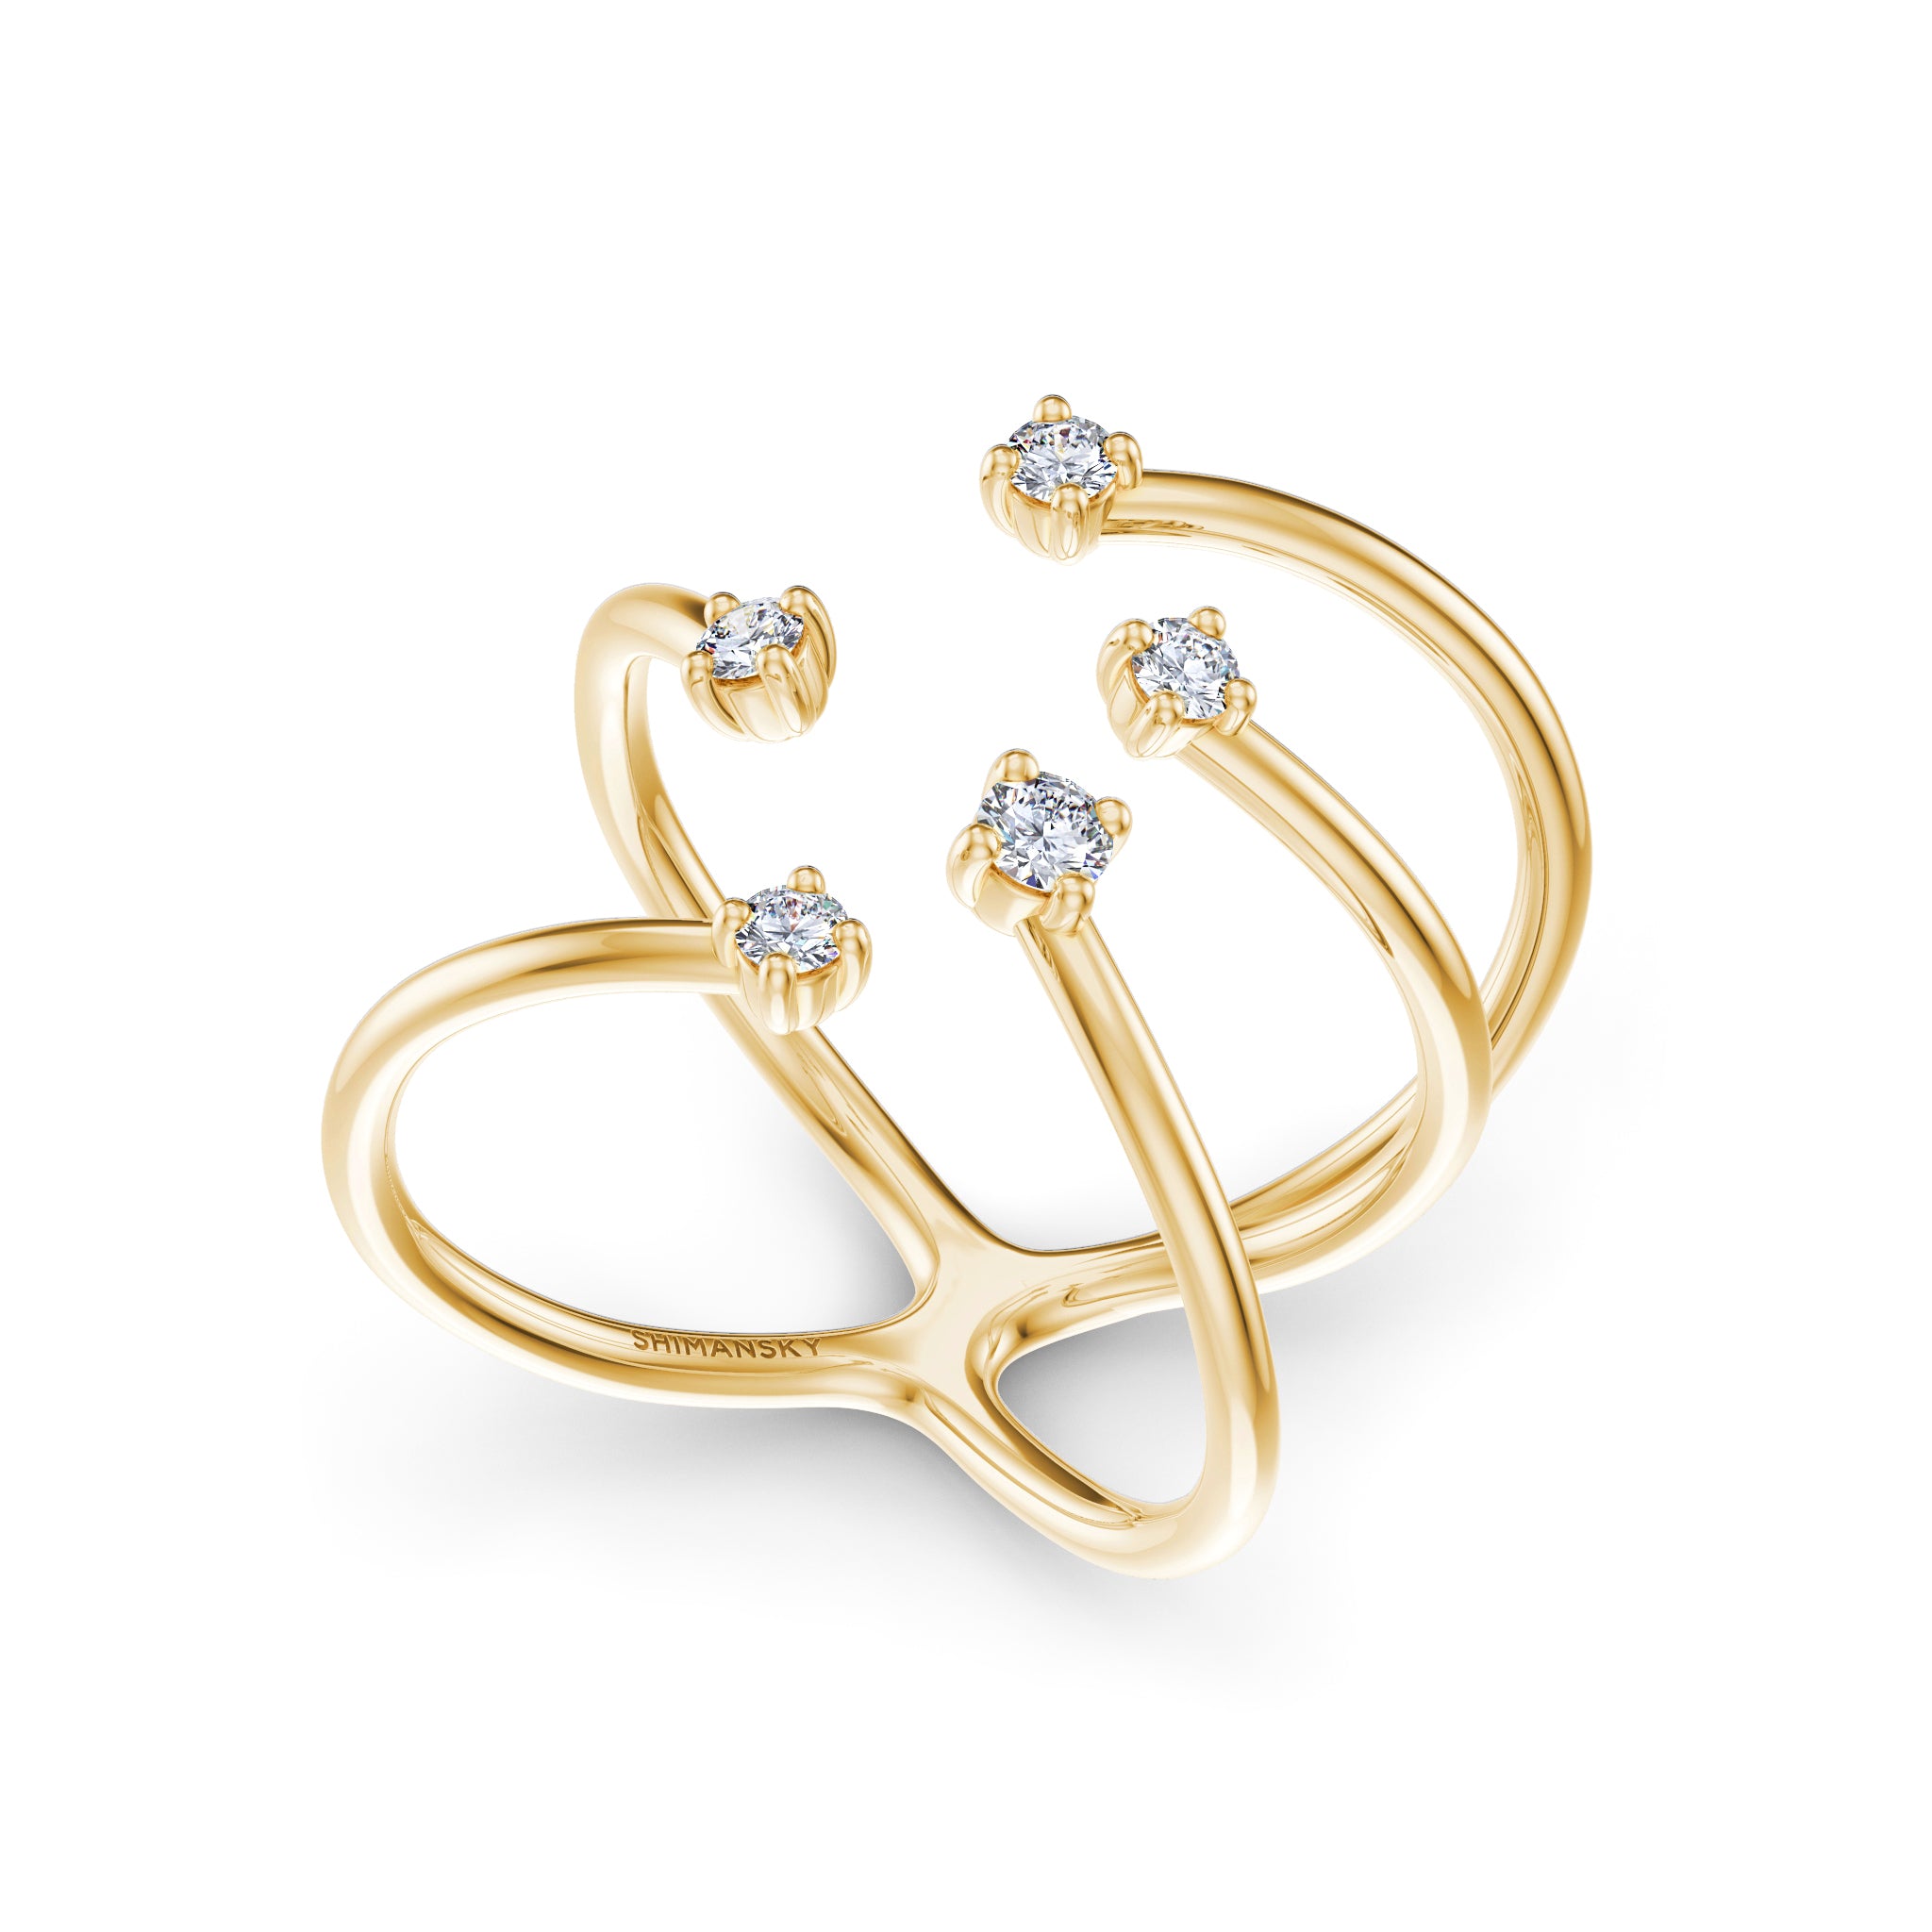 Shimansky - Southern Cross Large Diamond Ring Crafted in 14K Yellow Gold